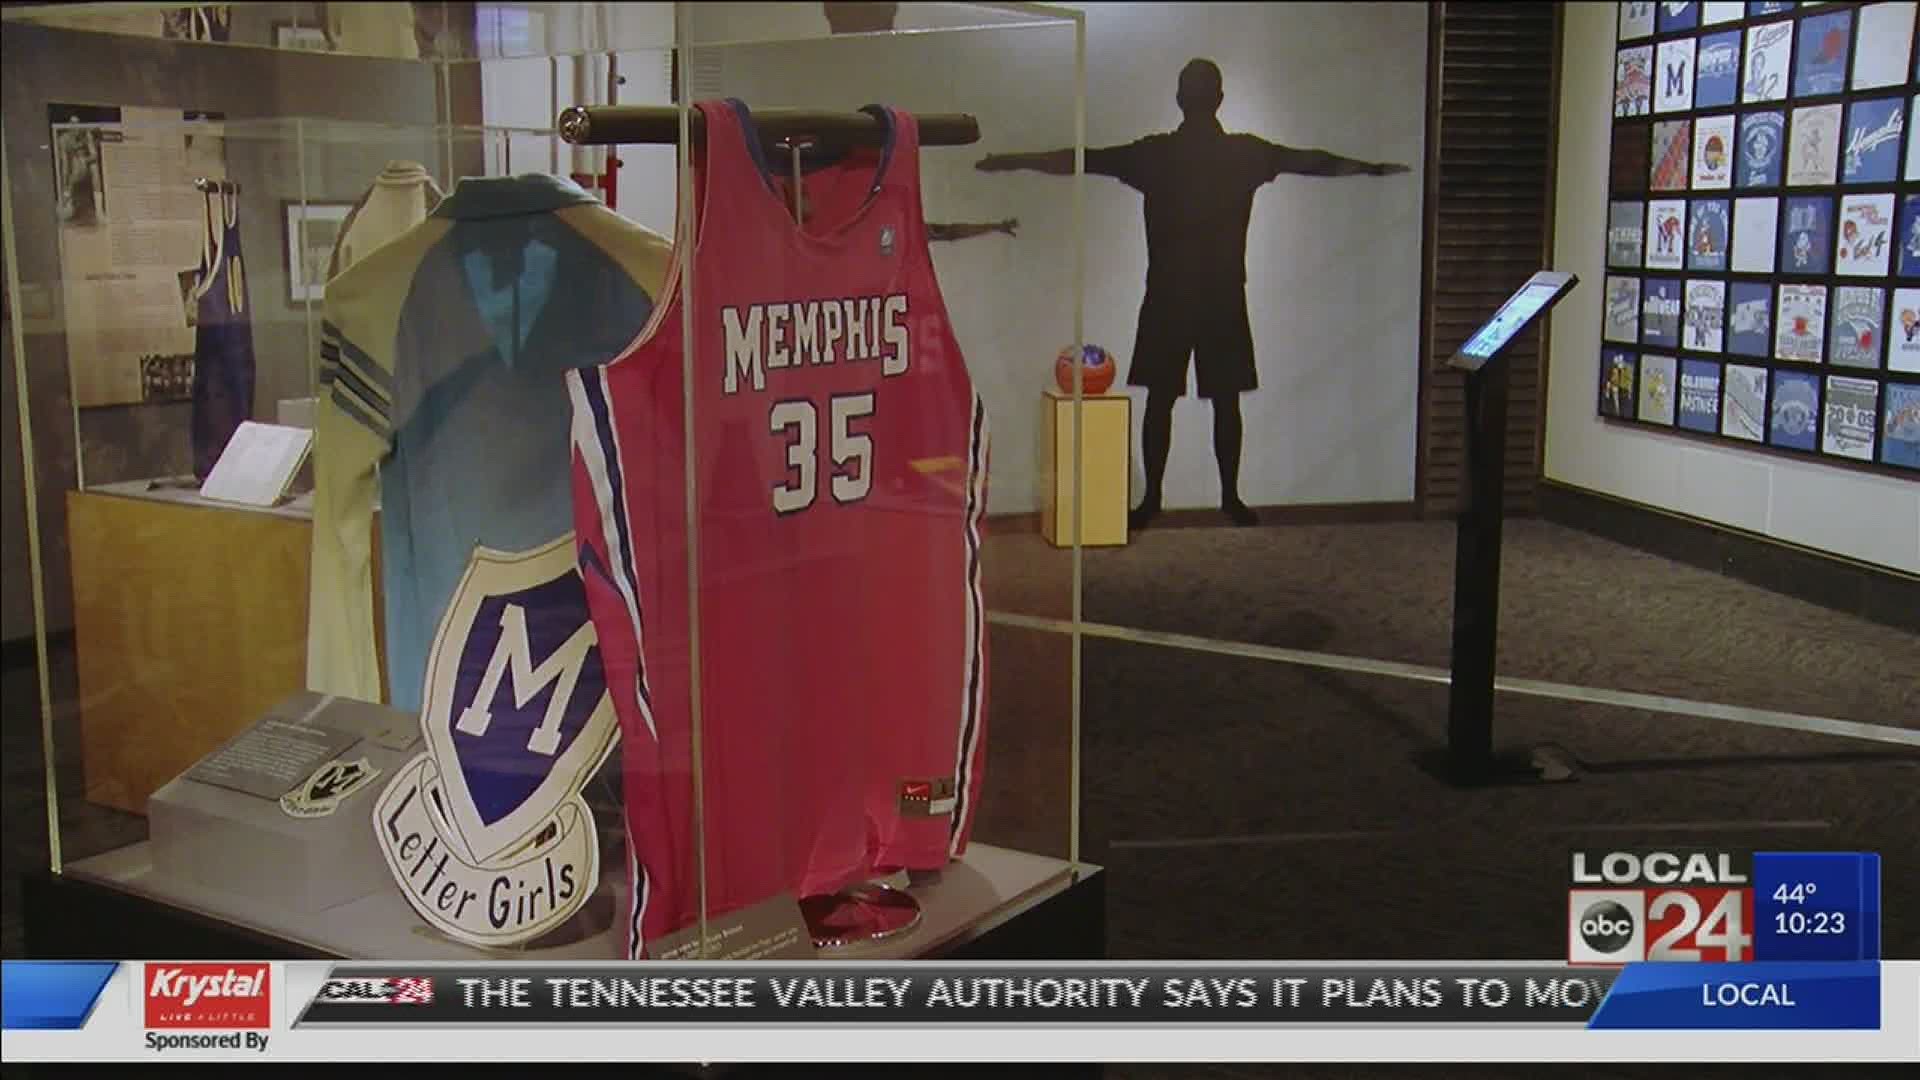 Exhibit includes memorabilia, photos, and artifacts from Memphis Tiger fans, former players, and coaches.